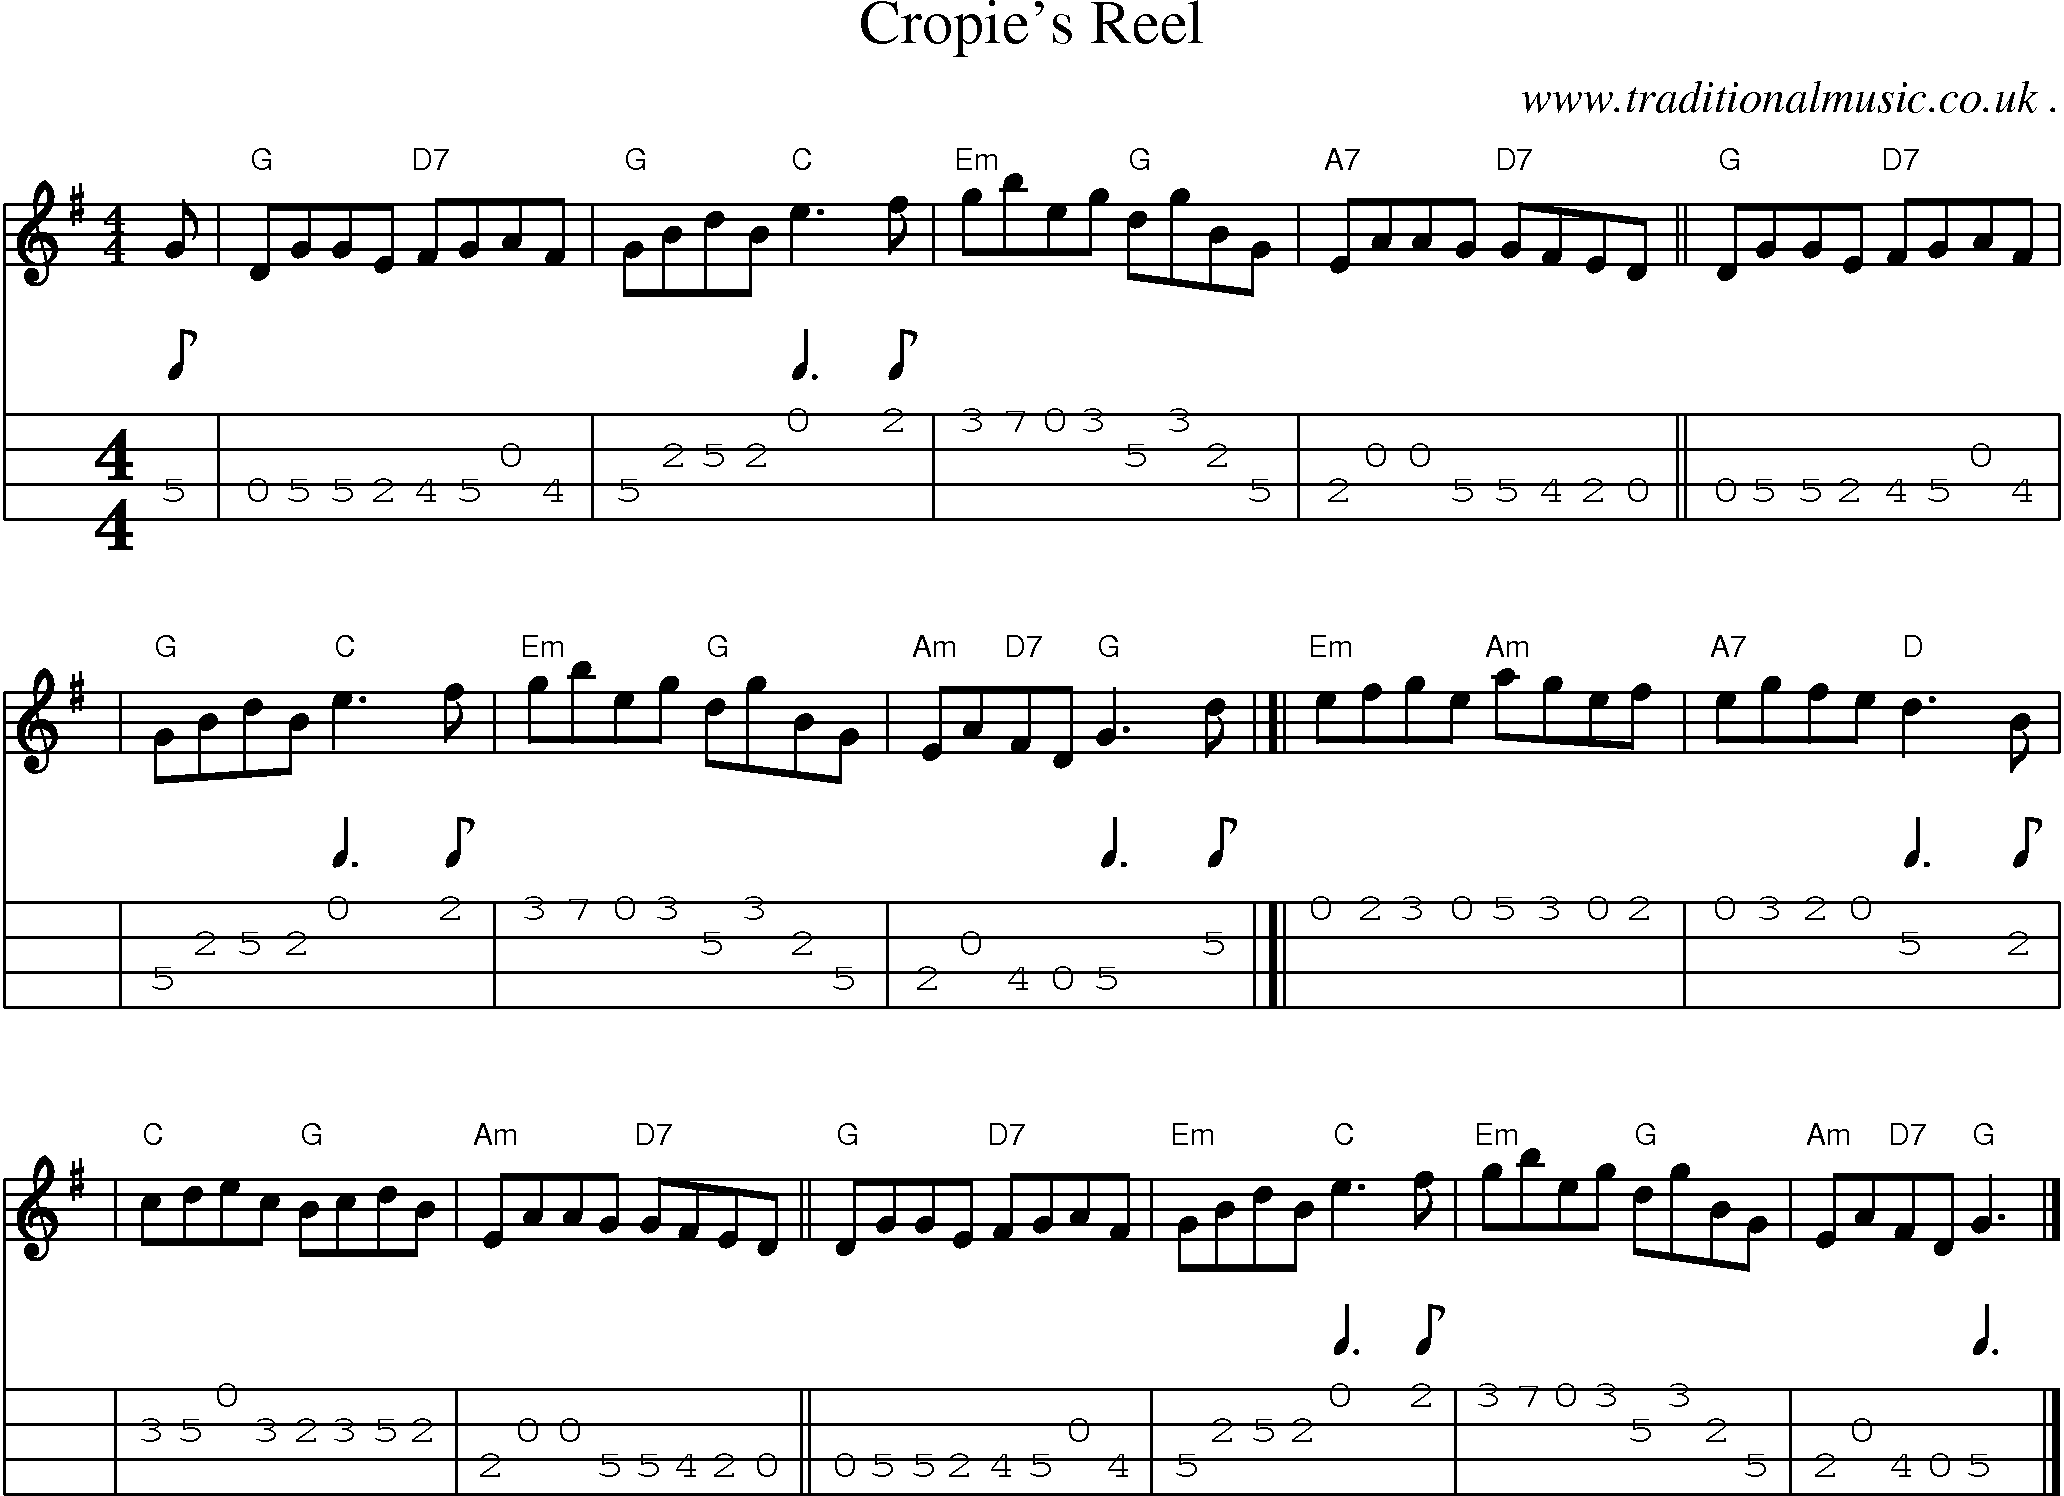 Sheet-music  score, Chords and Mandolin Tabs for Cropies Reel